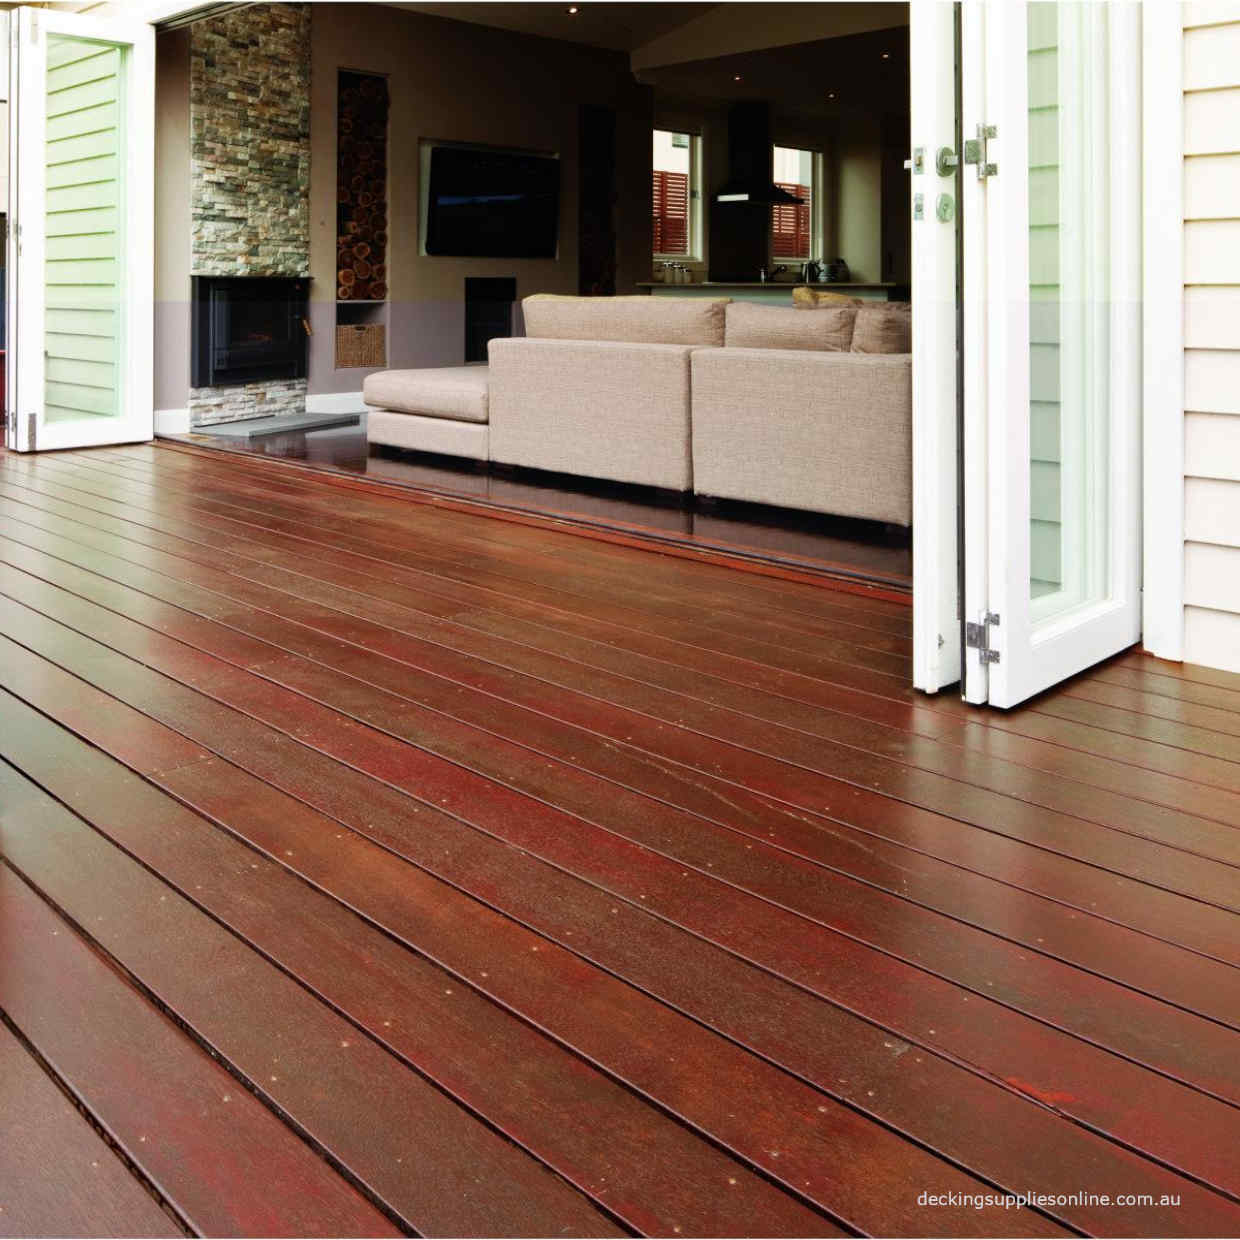 Cabots_Deck___Exterior_Stain_Oil_Based_Decking_Supplies_Online